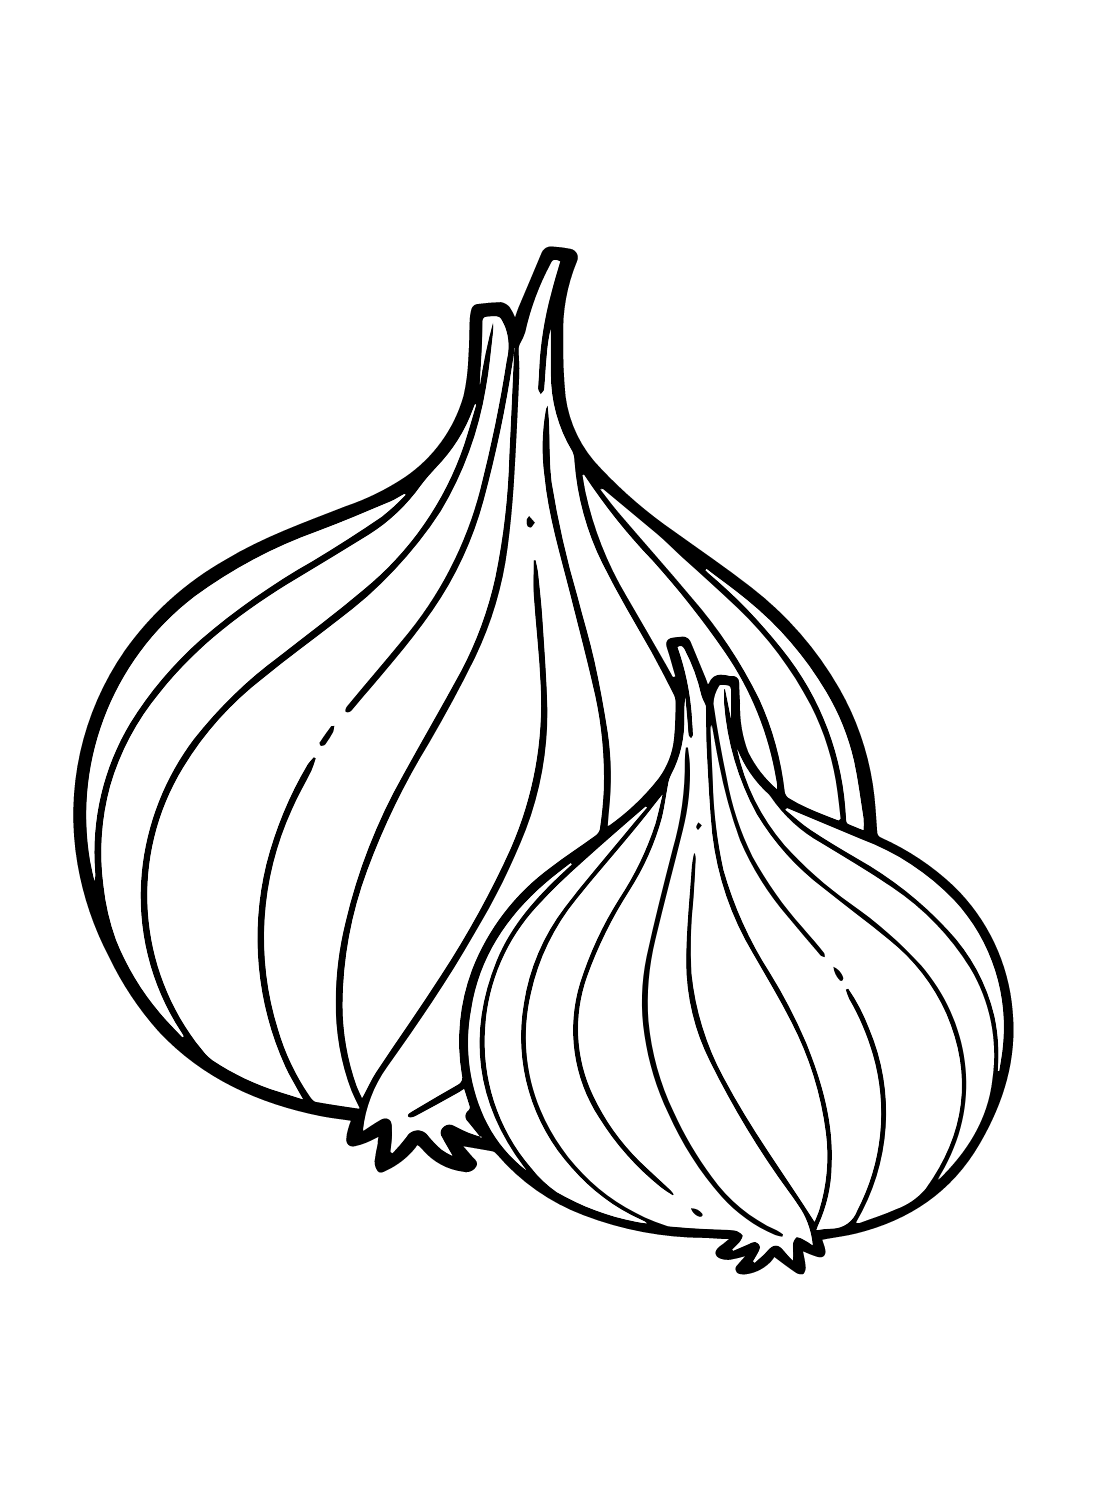 Onion Pictures Coloring Page